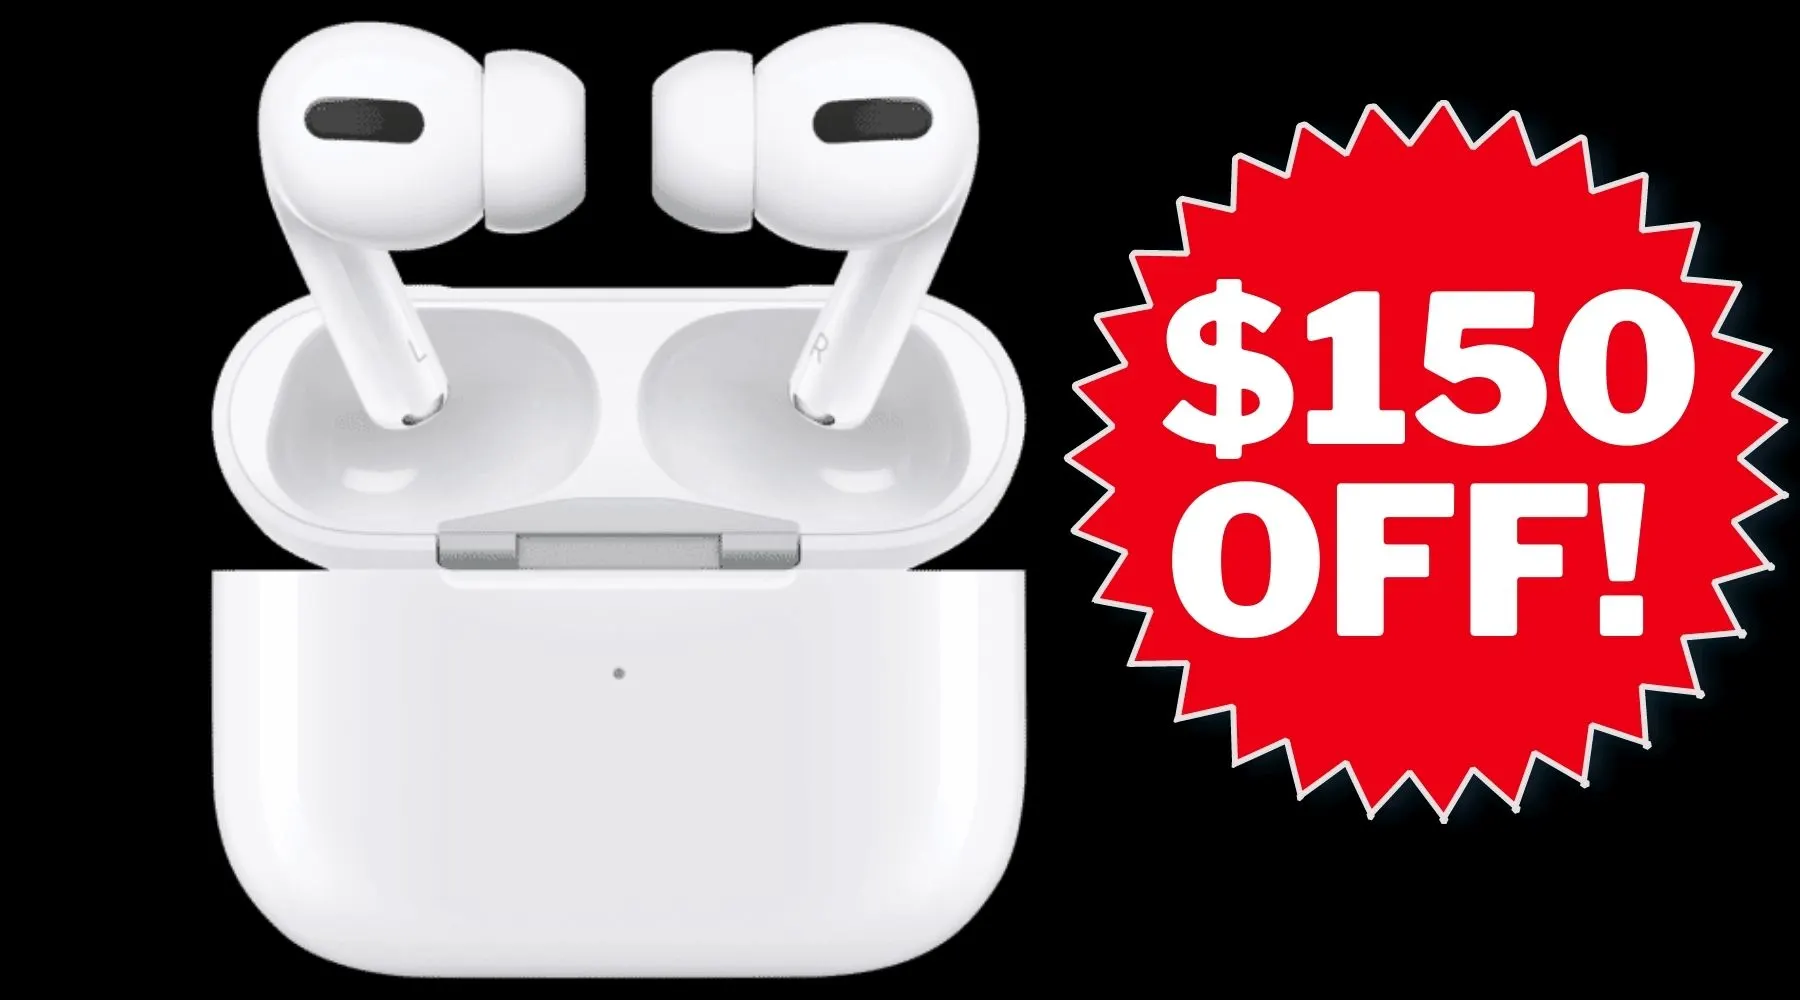 Apple AirPod sale: off right now at Finder